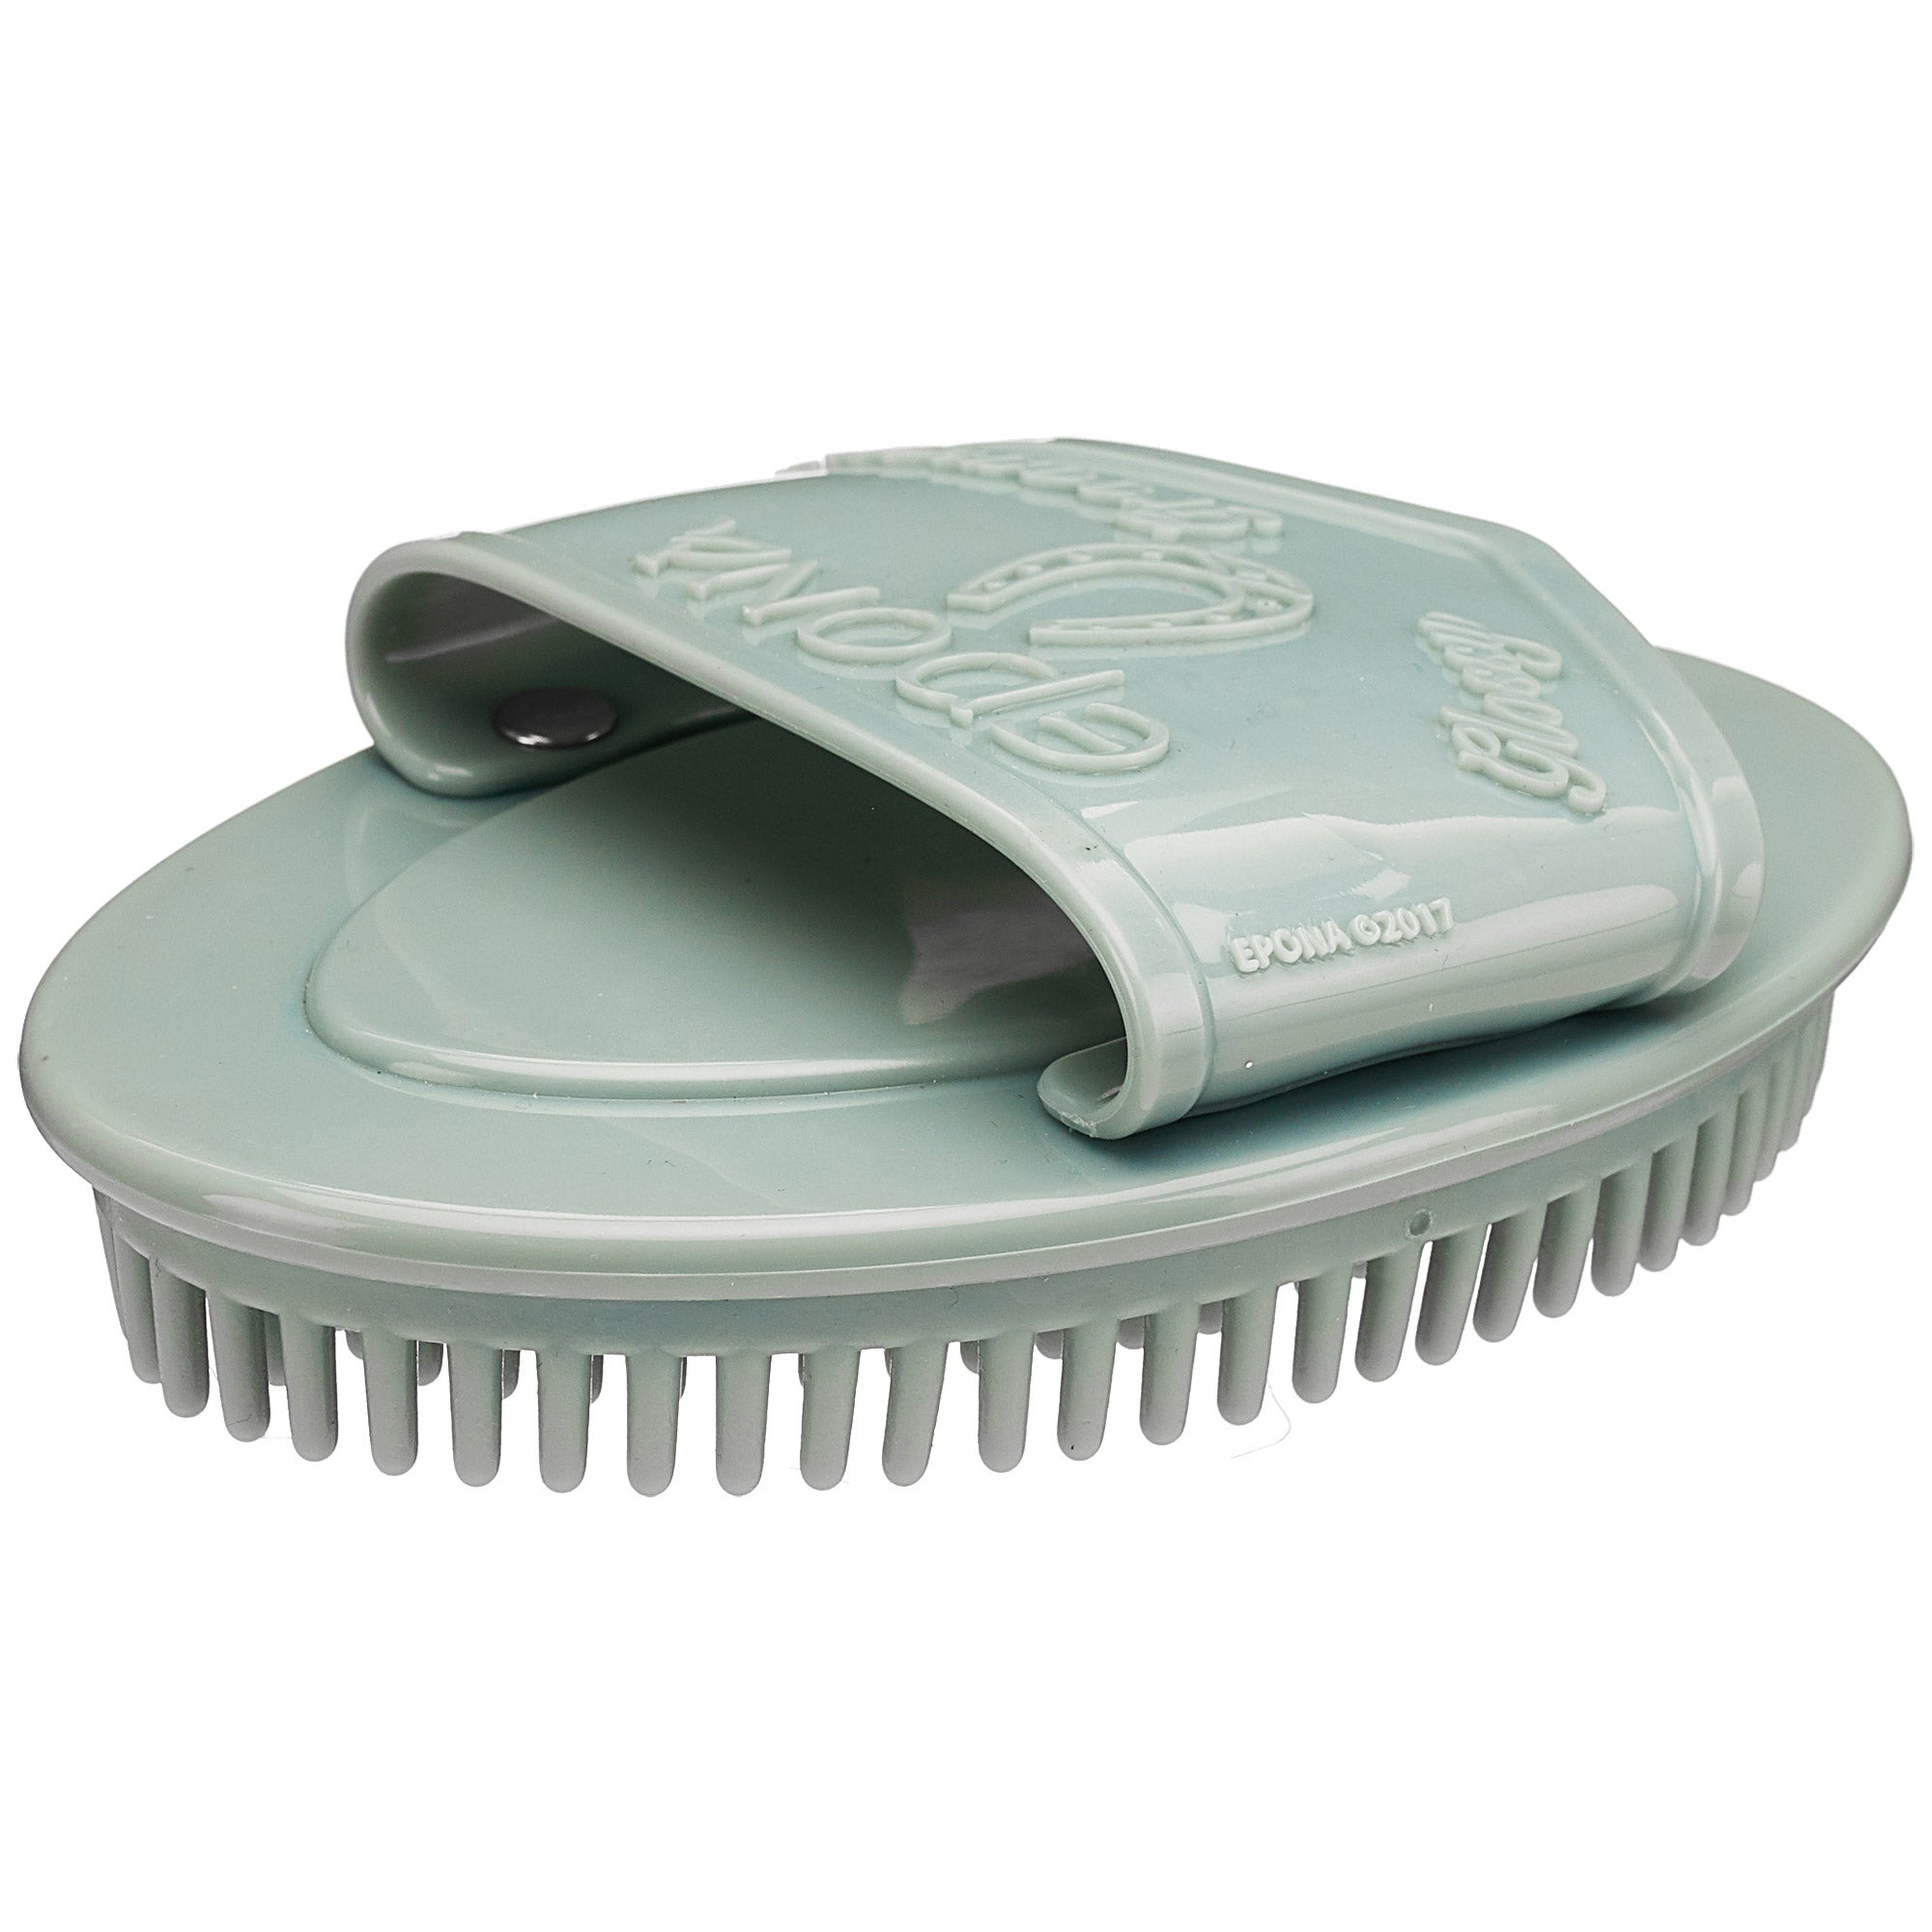 Flexible Horse Curry Comb Brush 